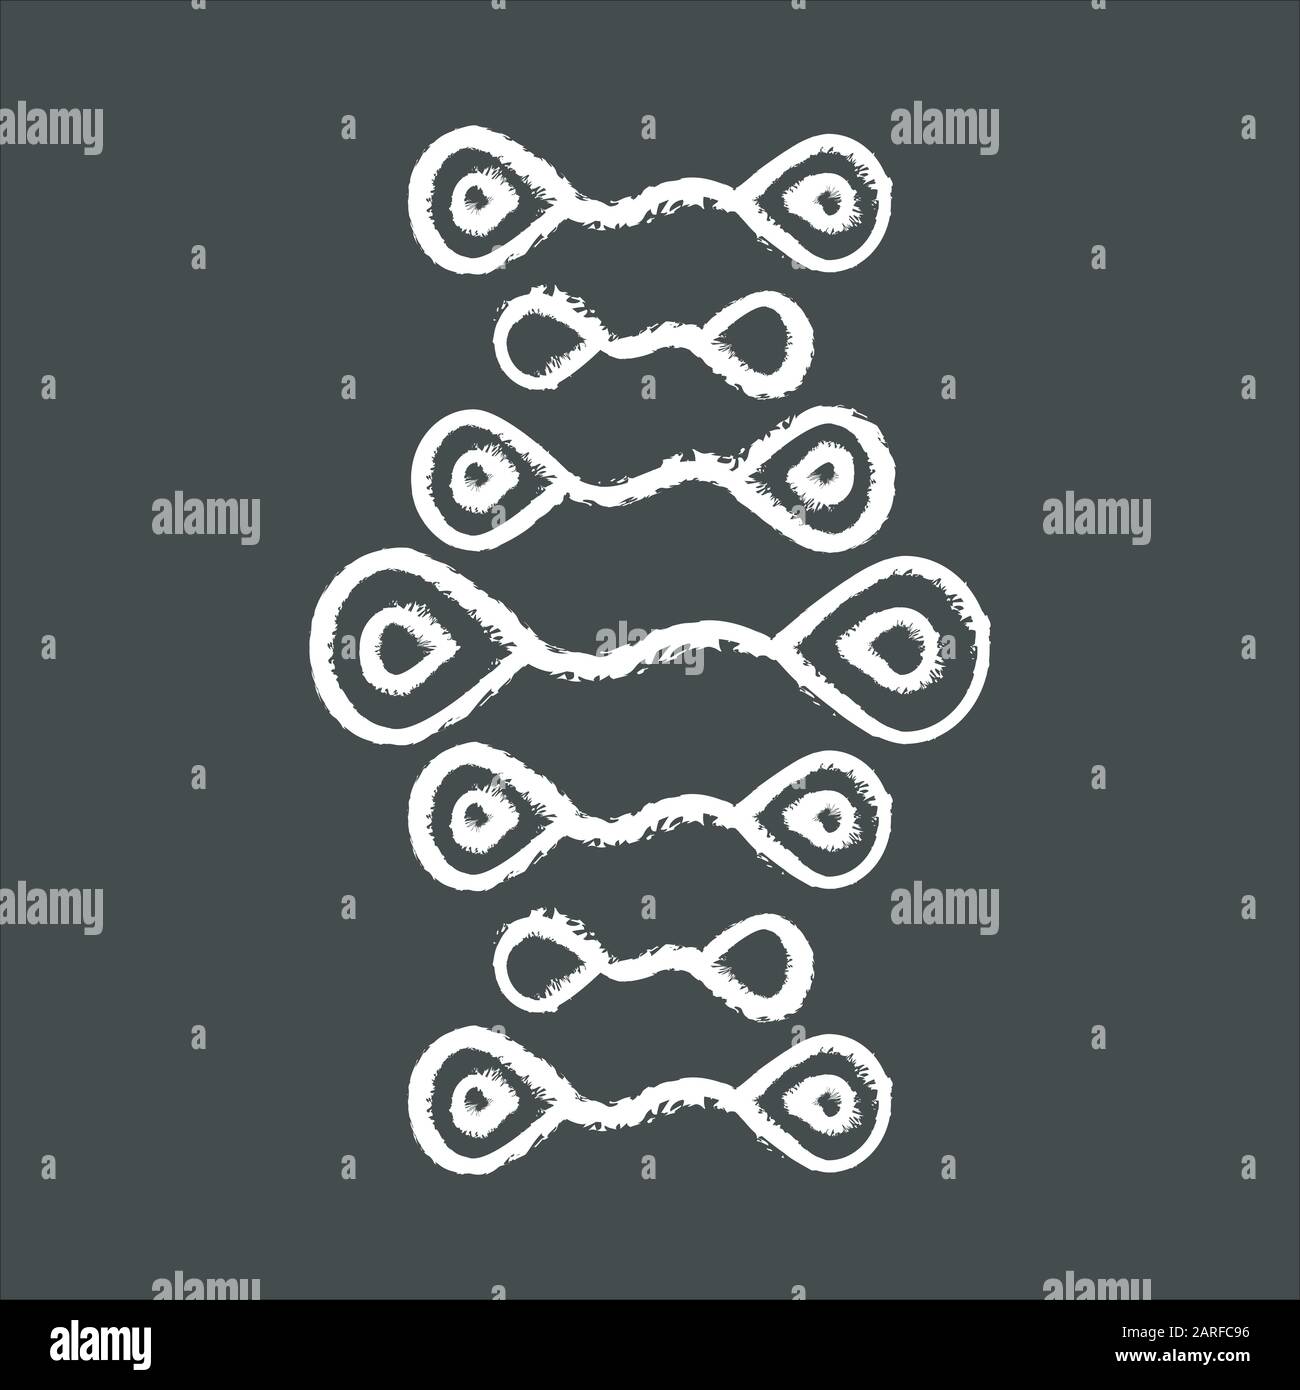 DNA strands chalk icon. Deoxyribonucleic, nucleic acid helix. Spiraling strands. Chromosome. Molecular biology. Genetic engineering. Genome. Genetics. Stock Vector